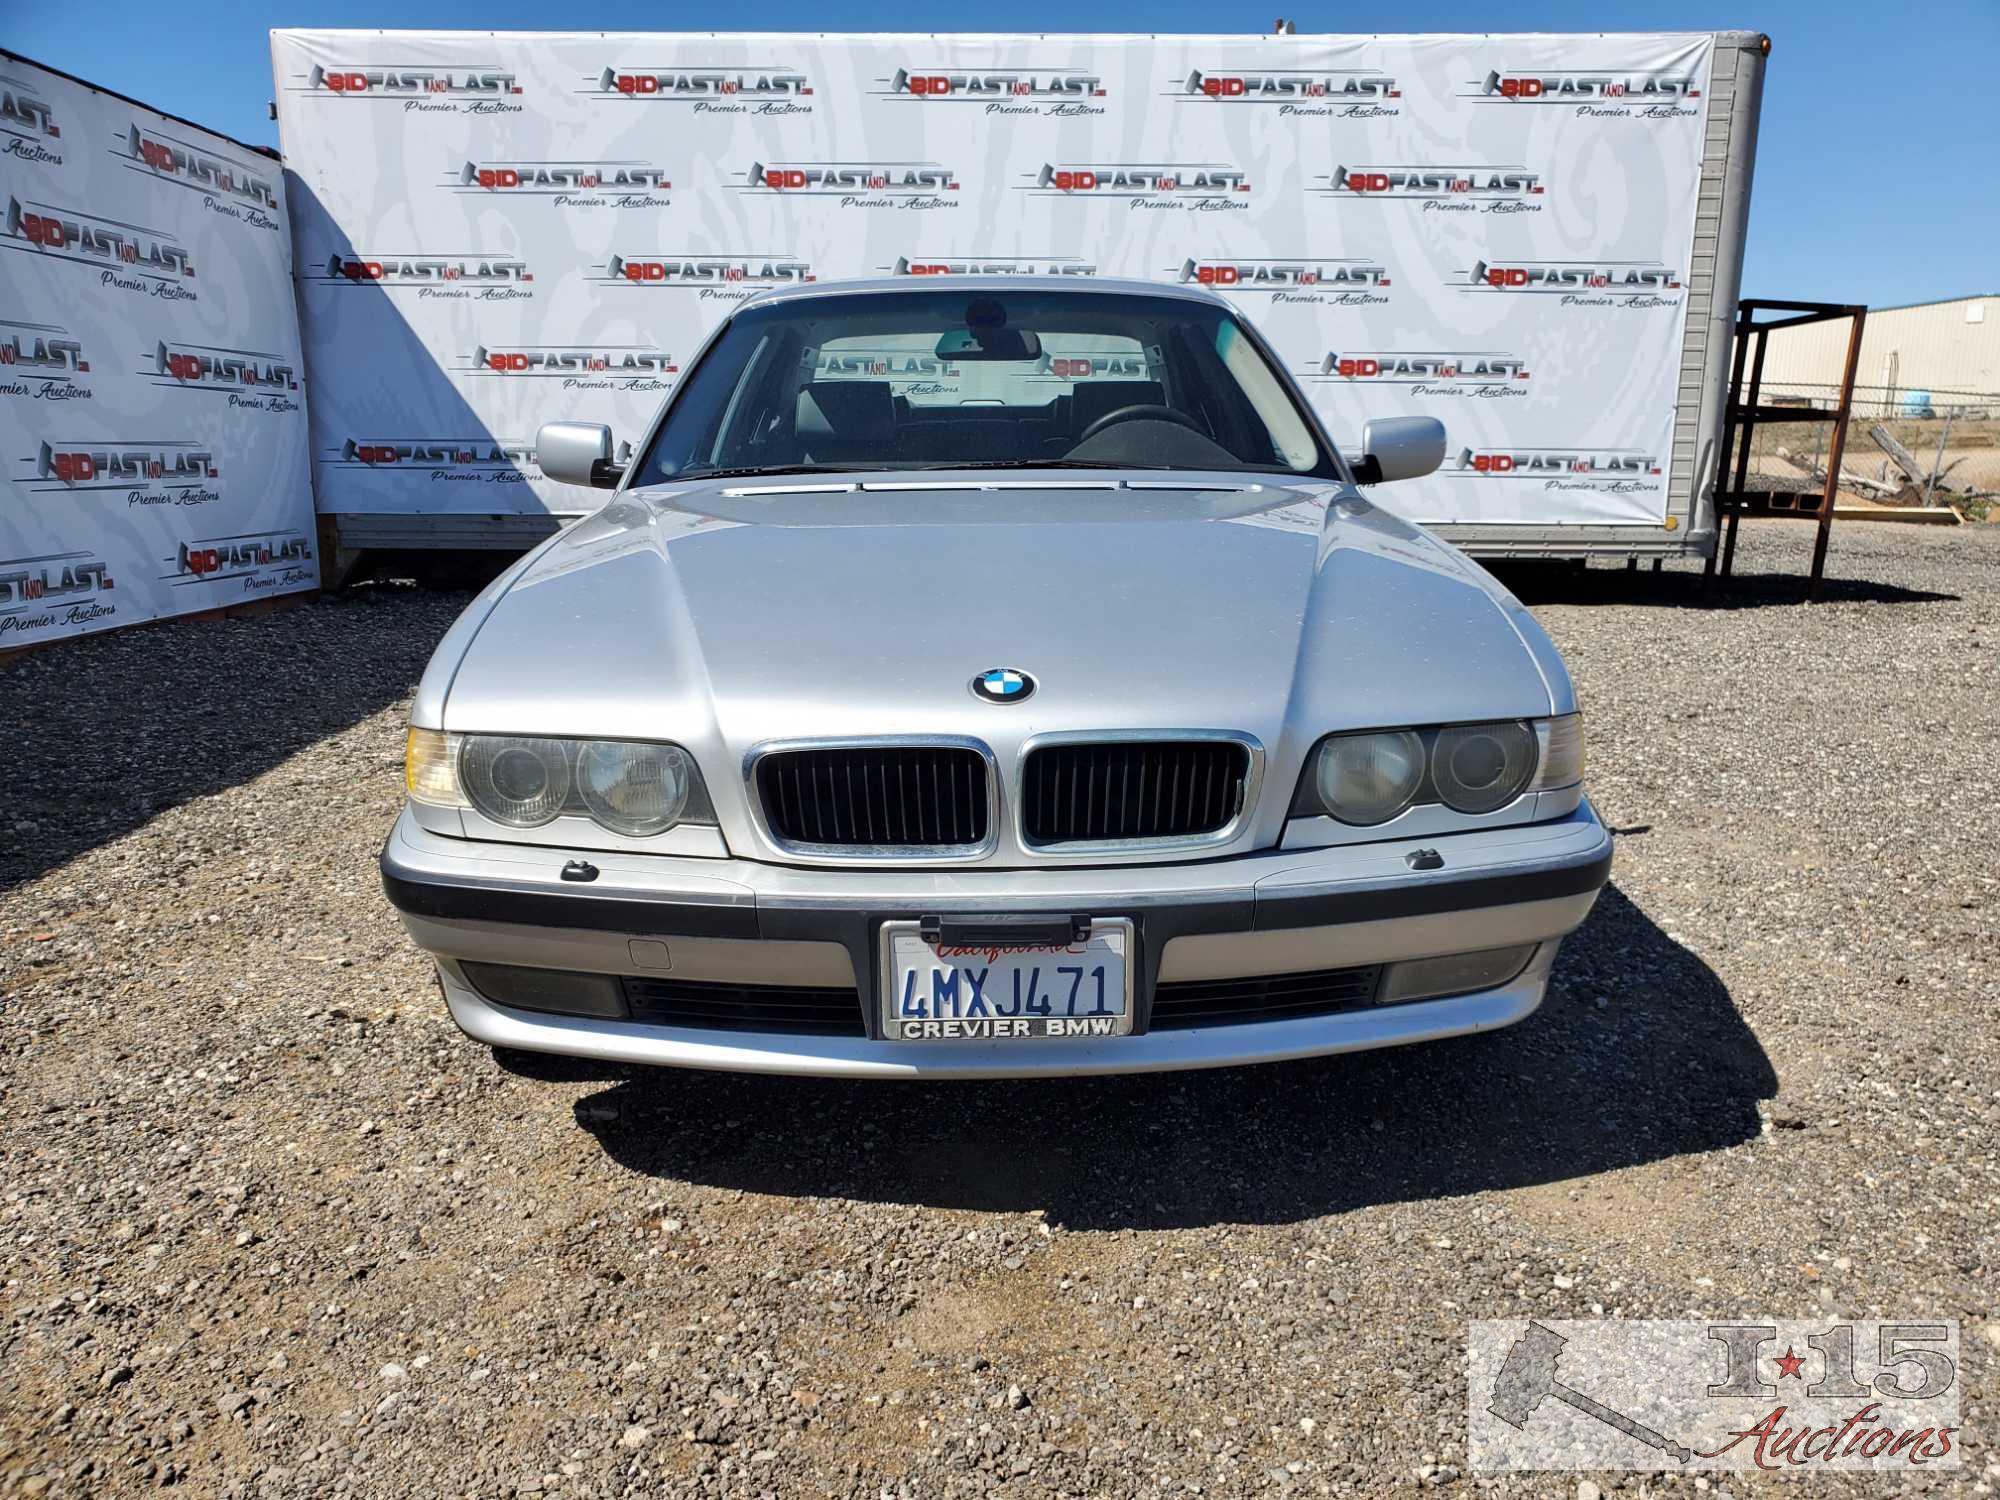 2001 BMW 7 Series Dealer or out of the state of California buyer only